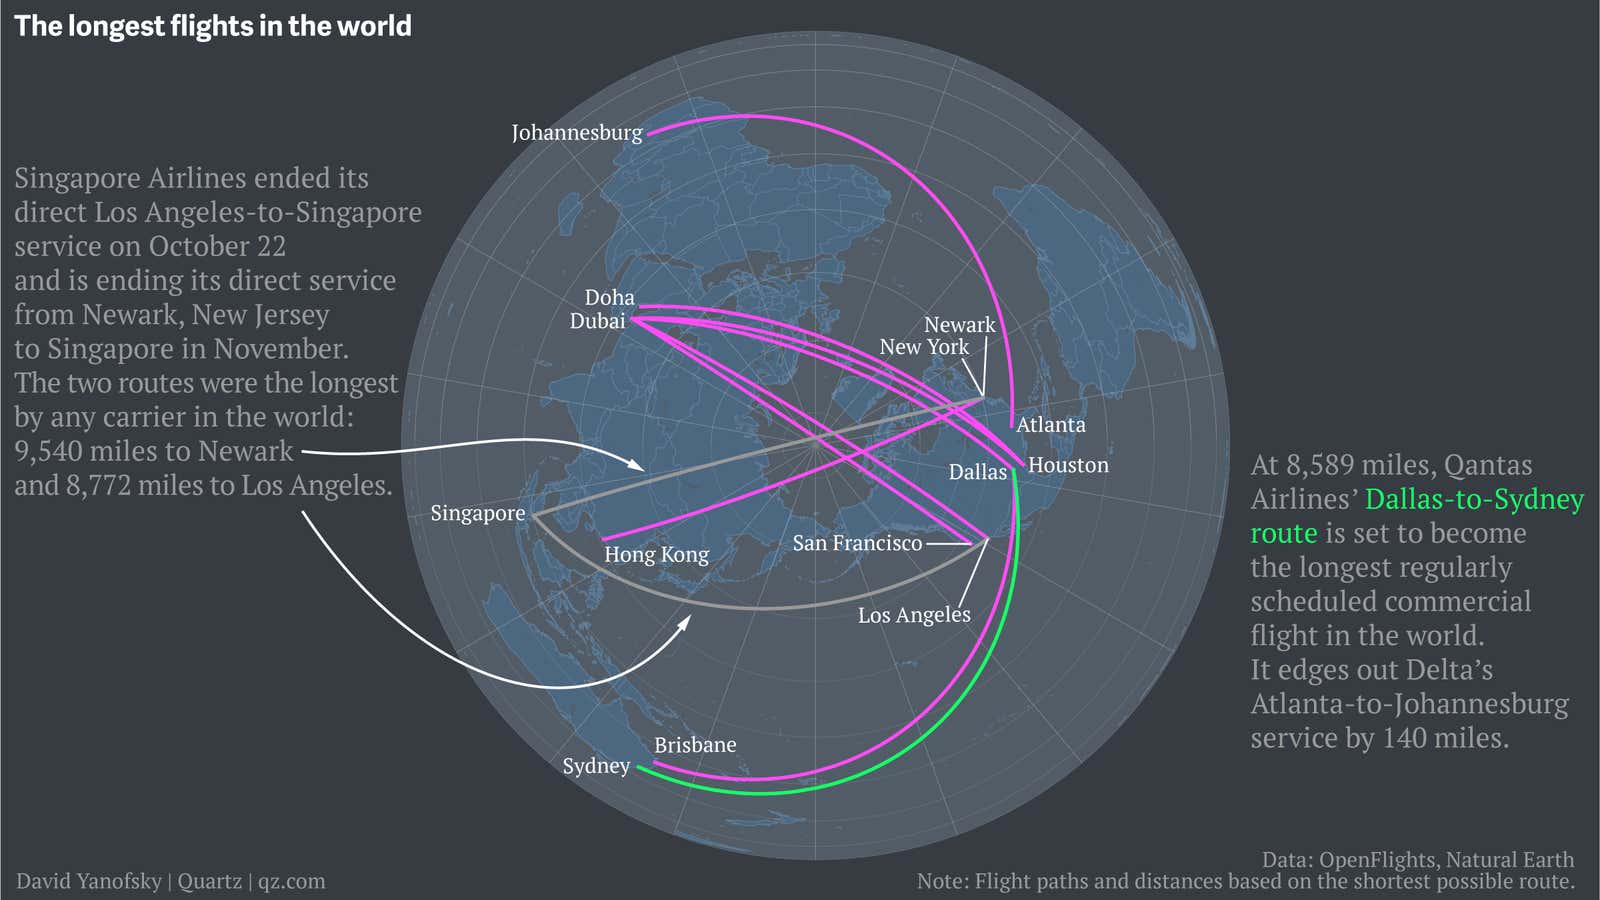 The longest flight in the world is about to be abolished